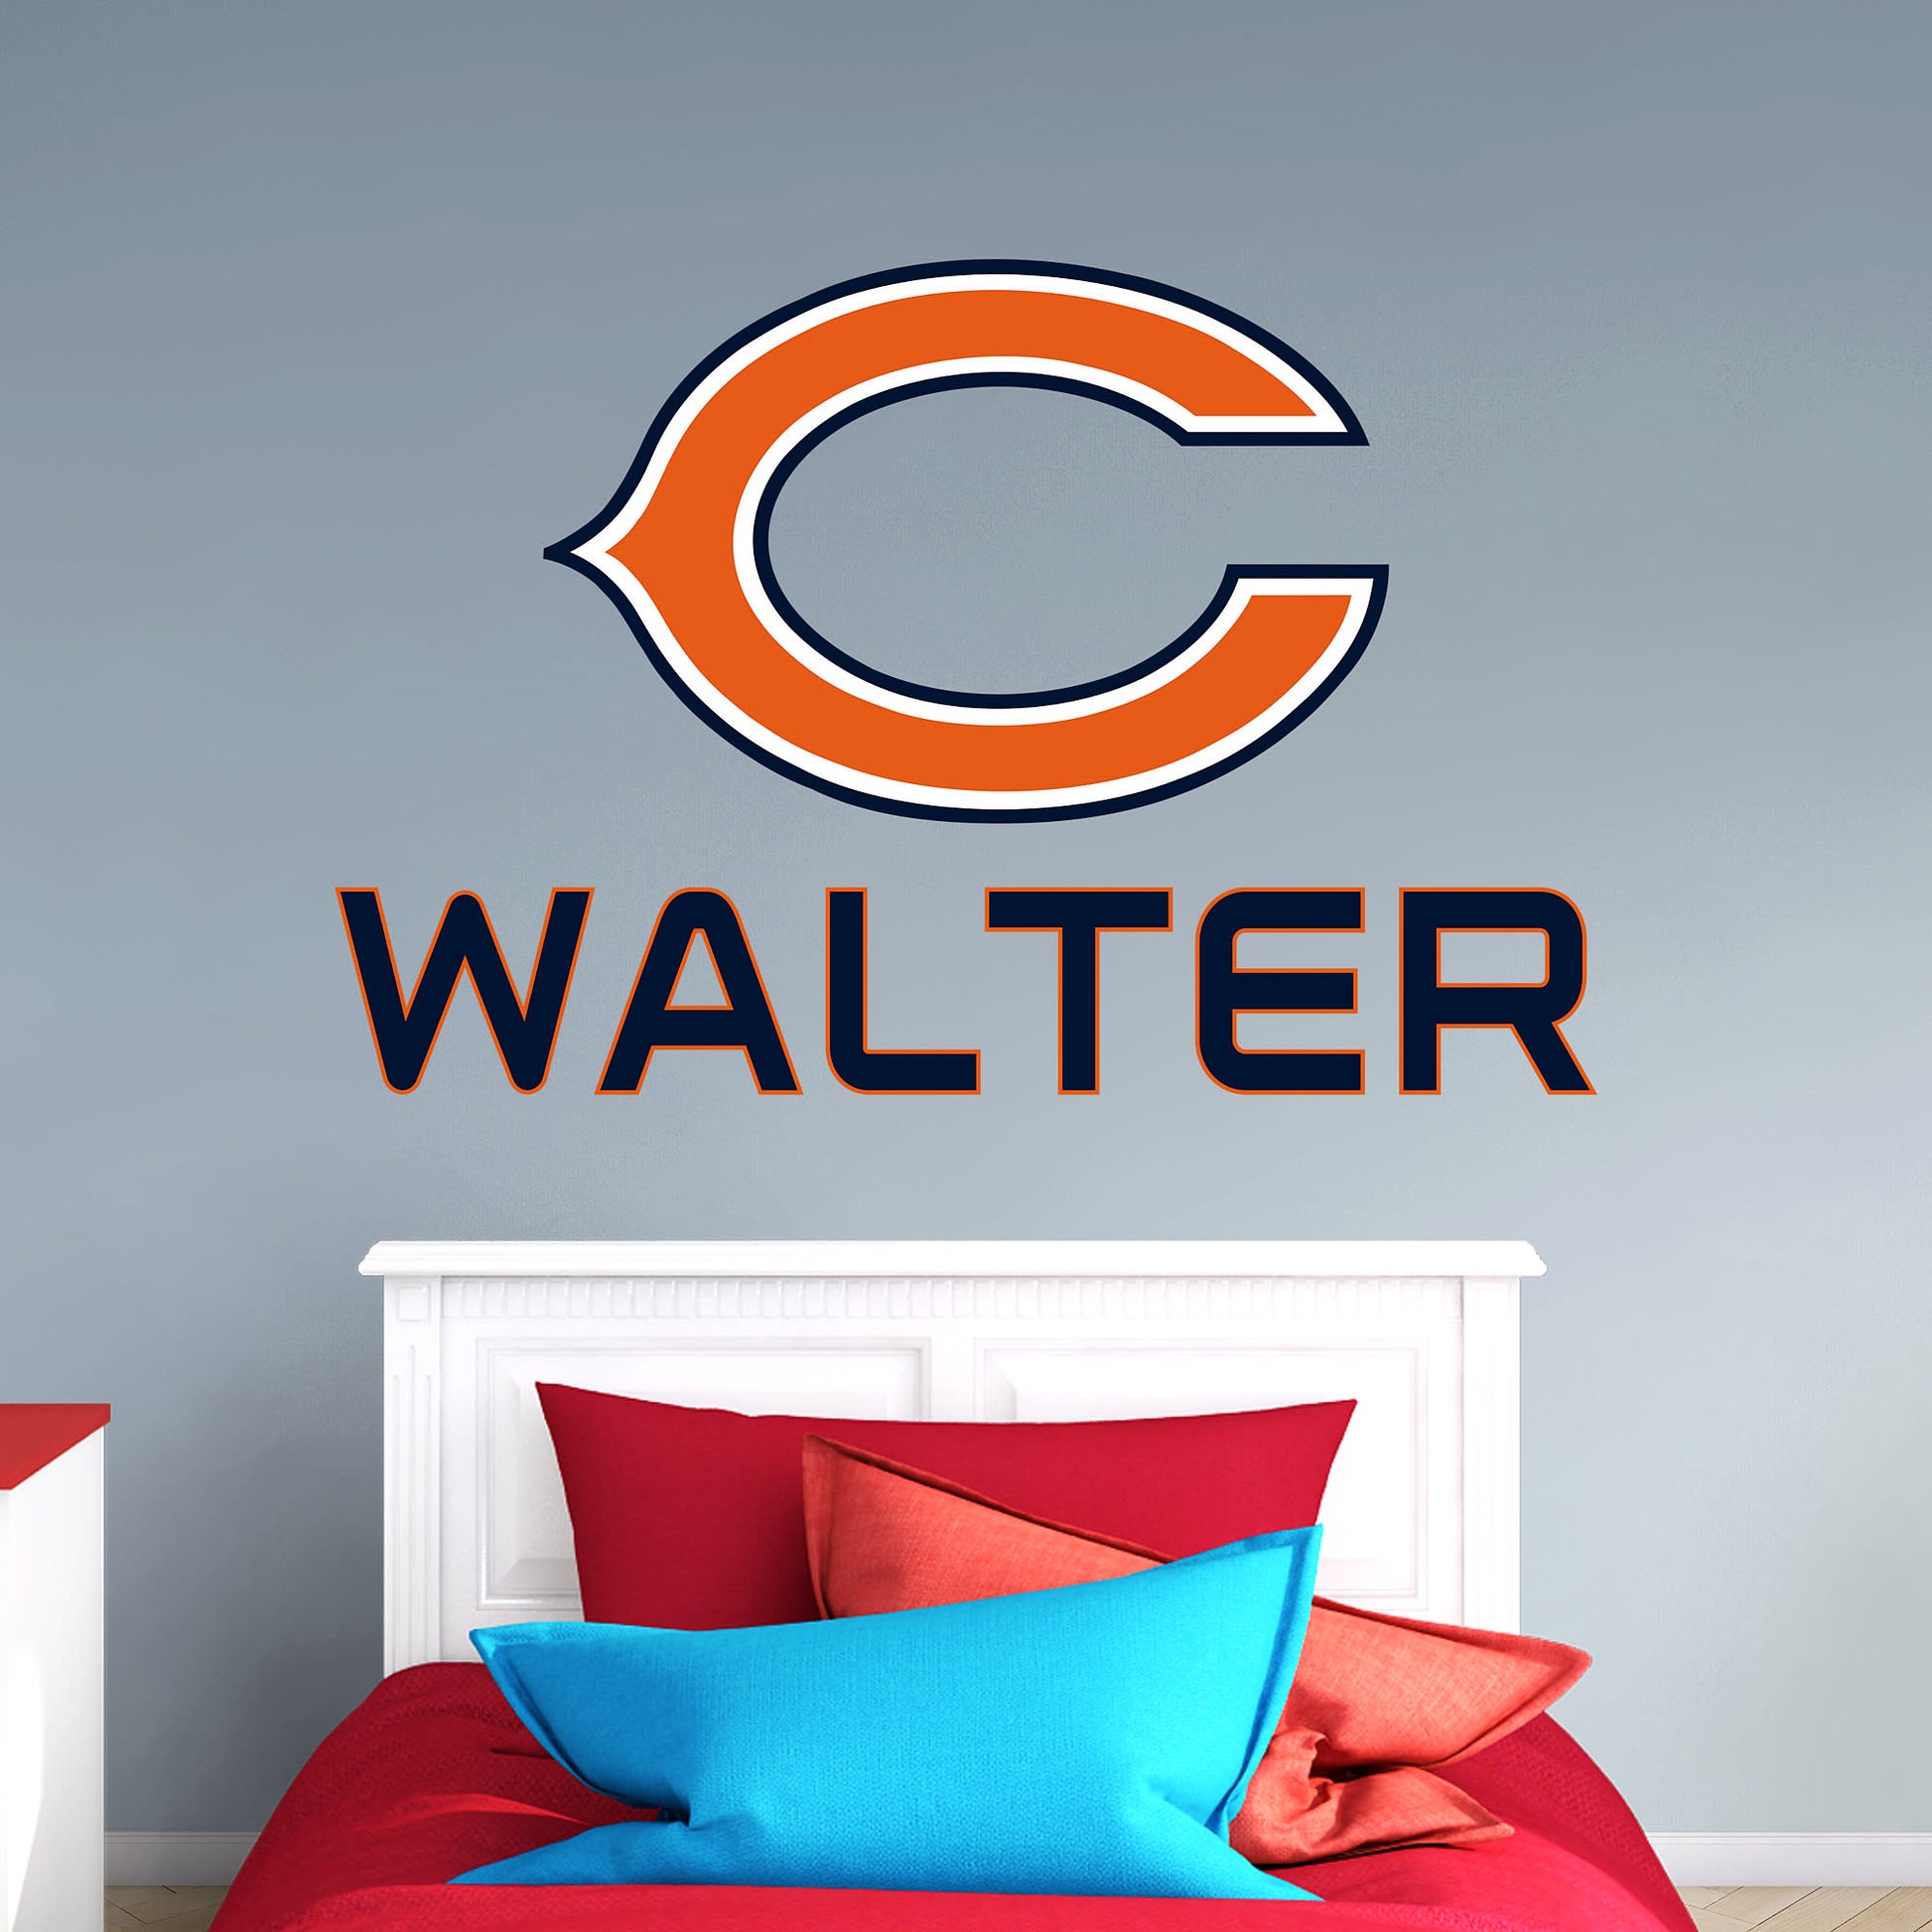 Chicago Bears: C Stacked Personalized Name - NFL Transfer Wall Decal in Orange (52W x 39.5H)